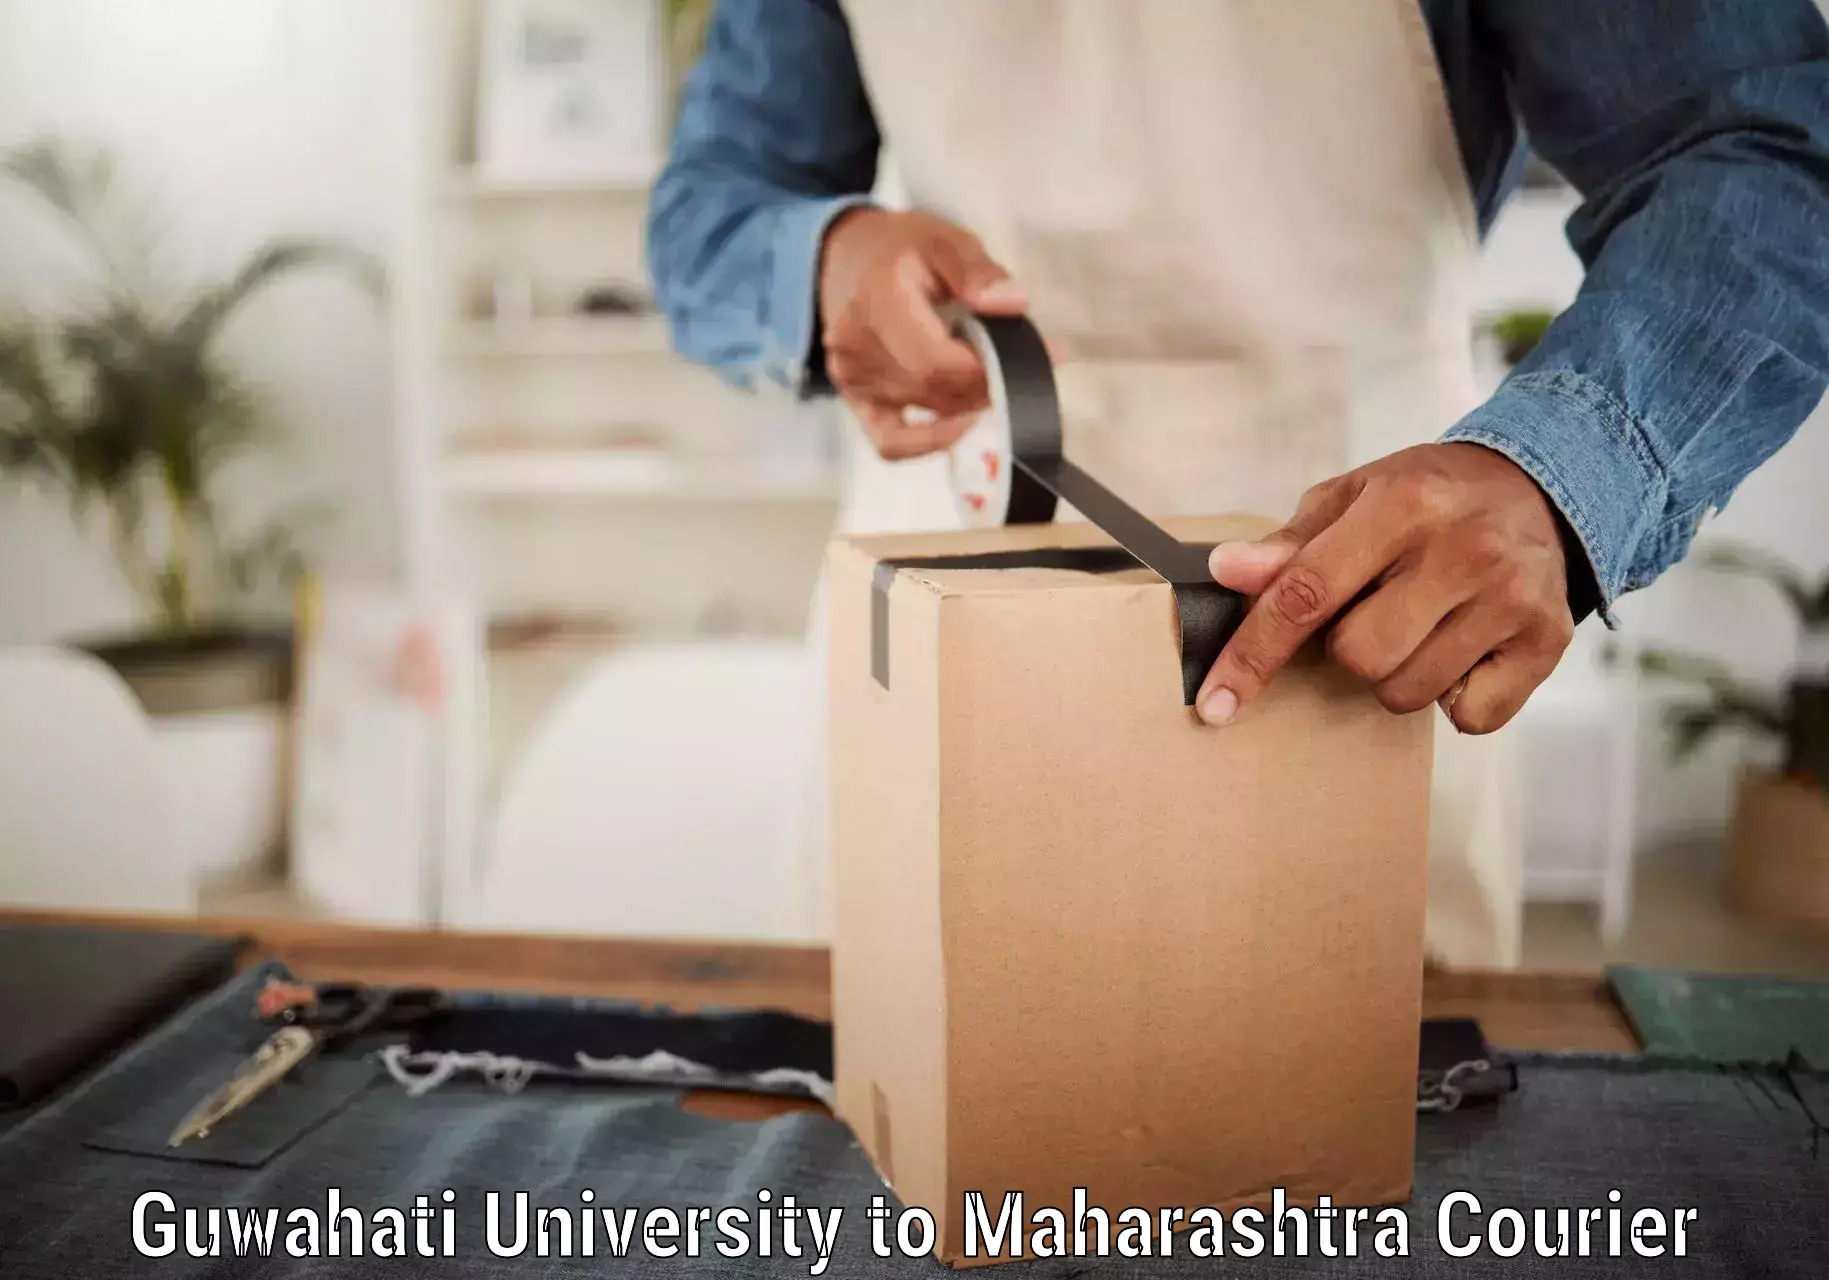 Customer-oriented courier services Guwahati University to Maharashtra